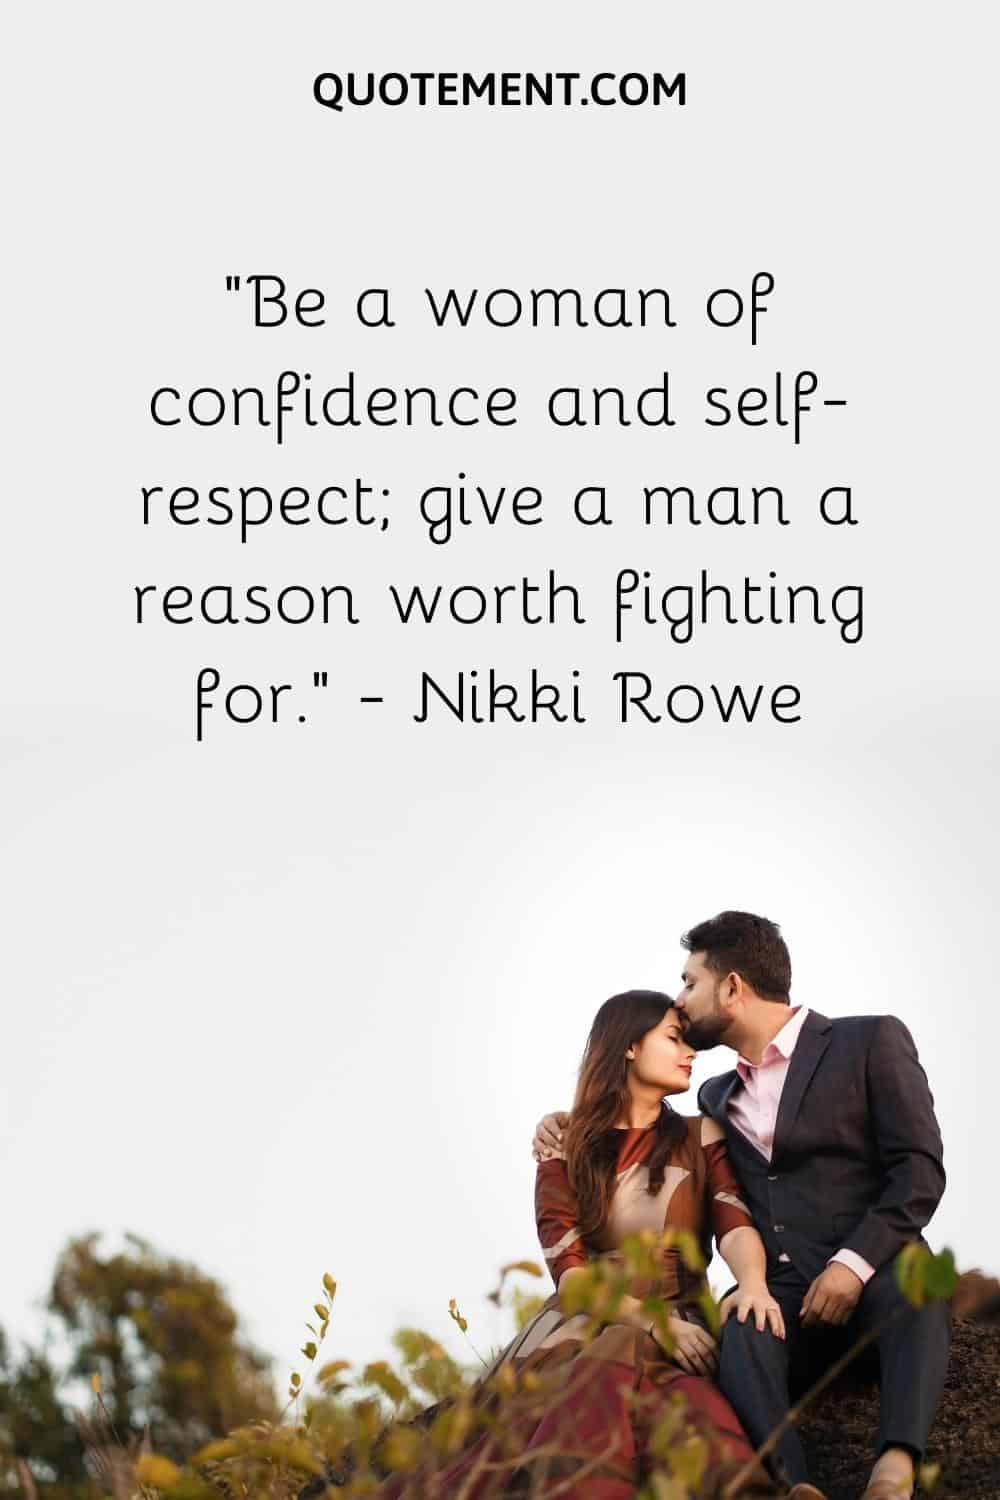 Be a woman of confidence and self-respect; give a man a reason worth fighting for